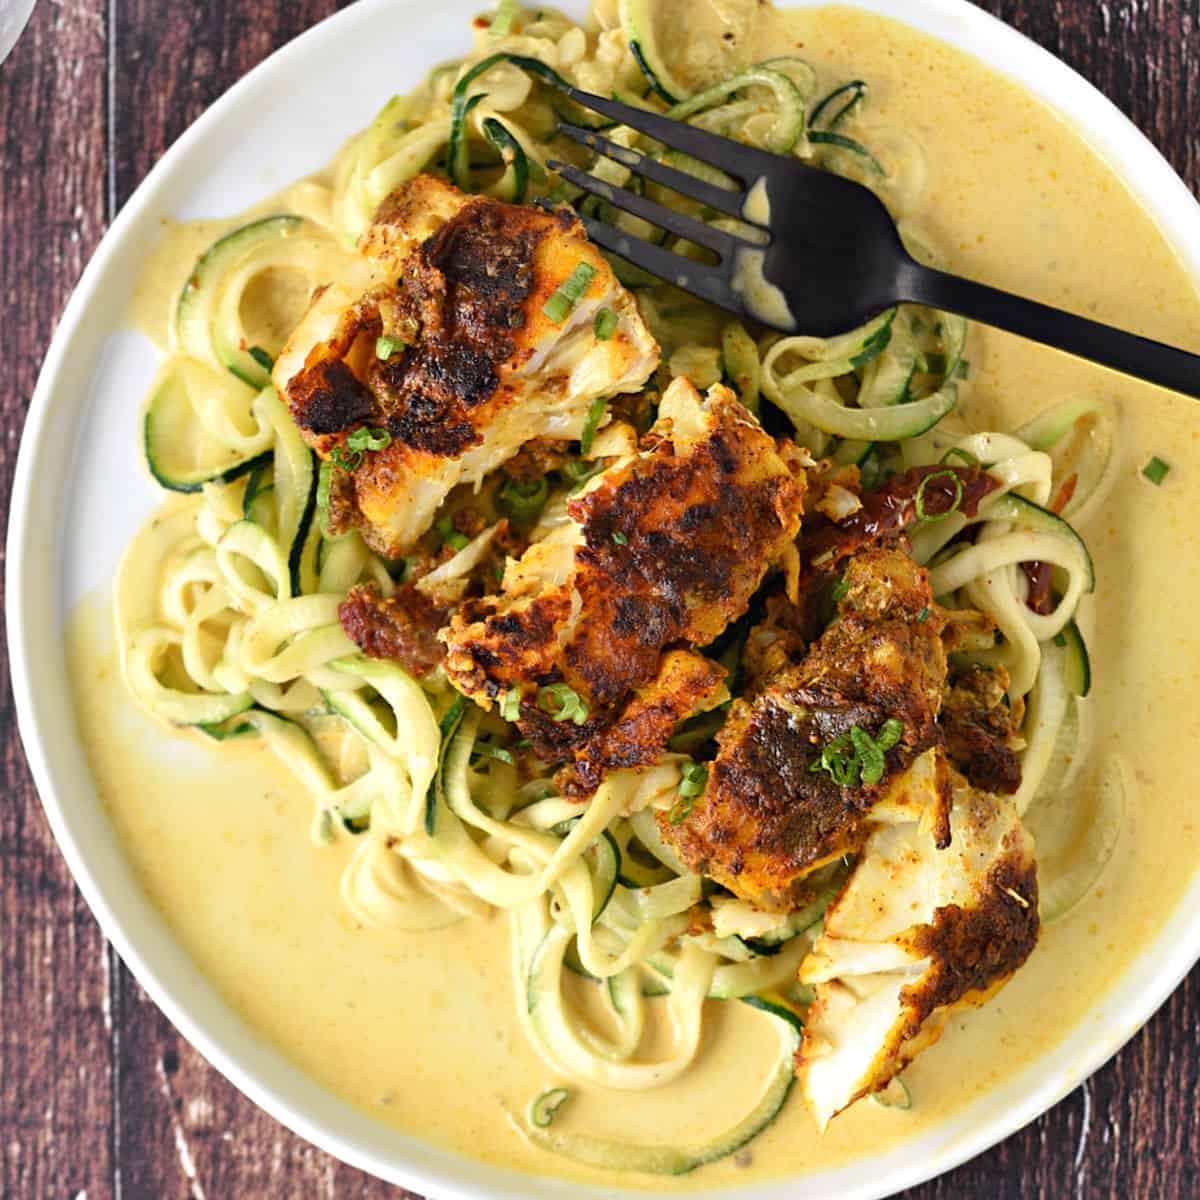 Cod and Zucchini Noodles